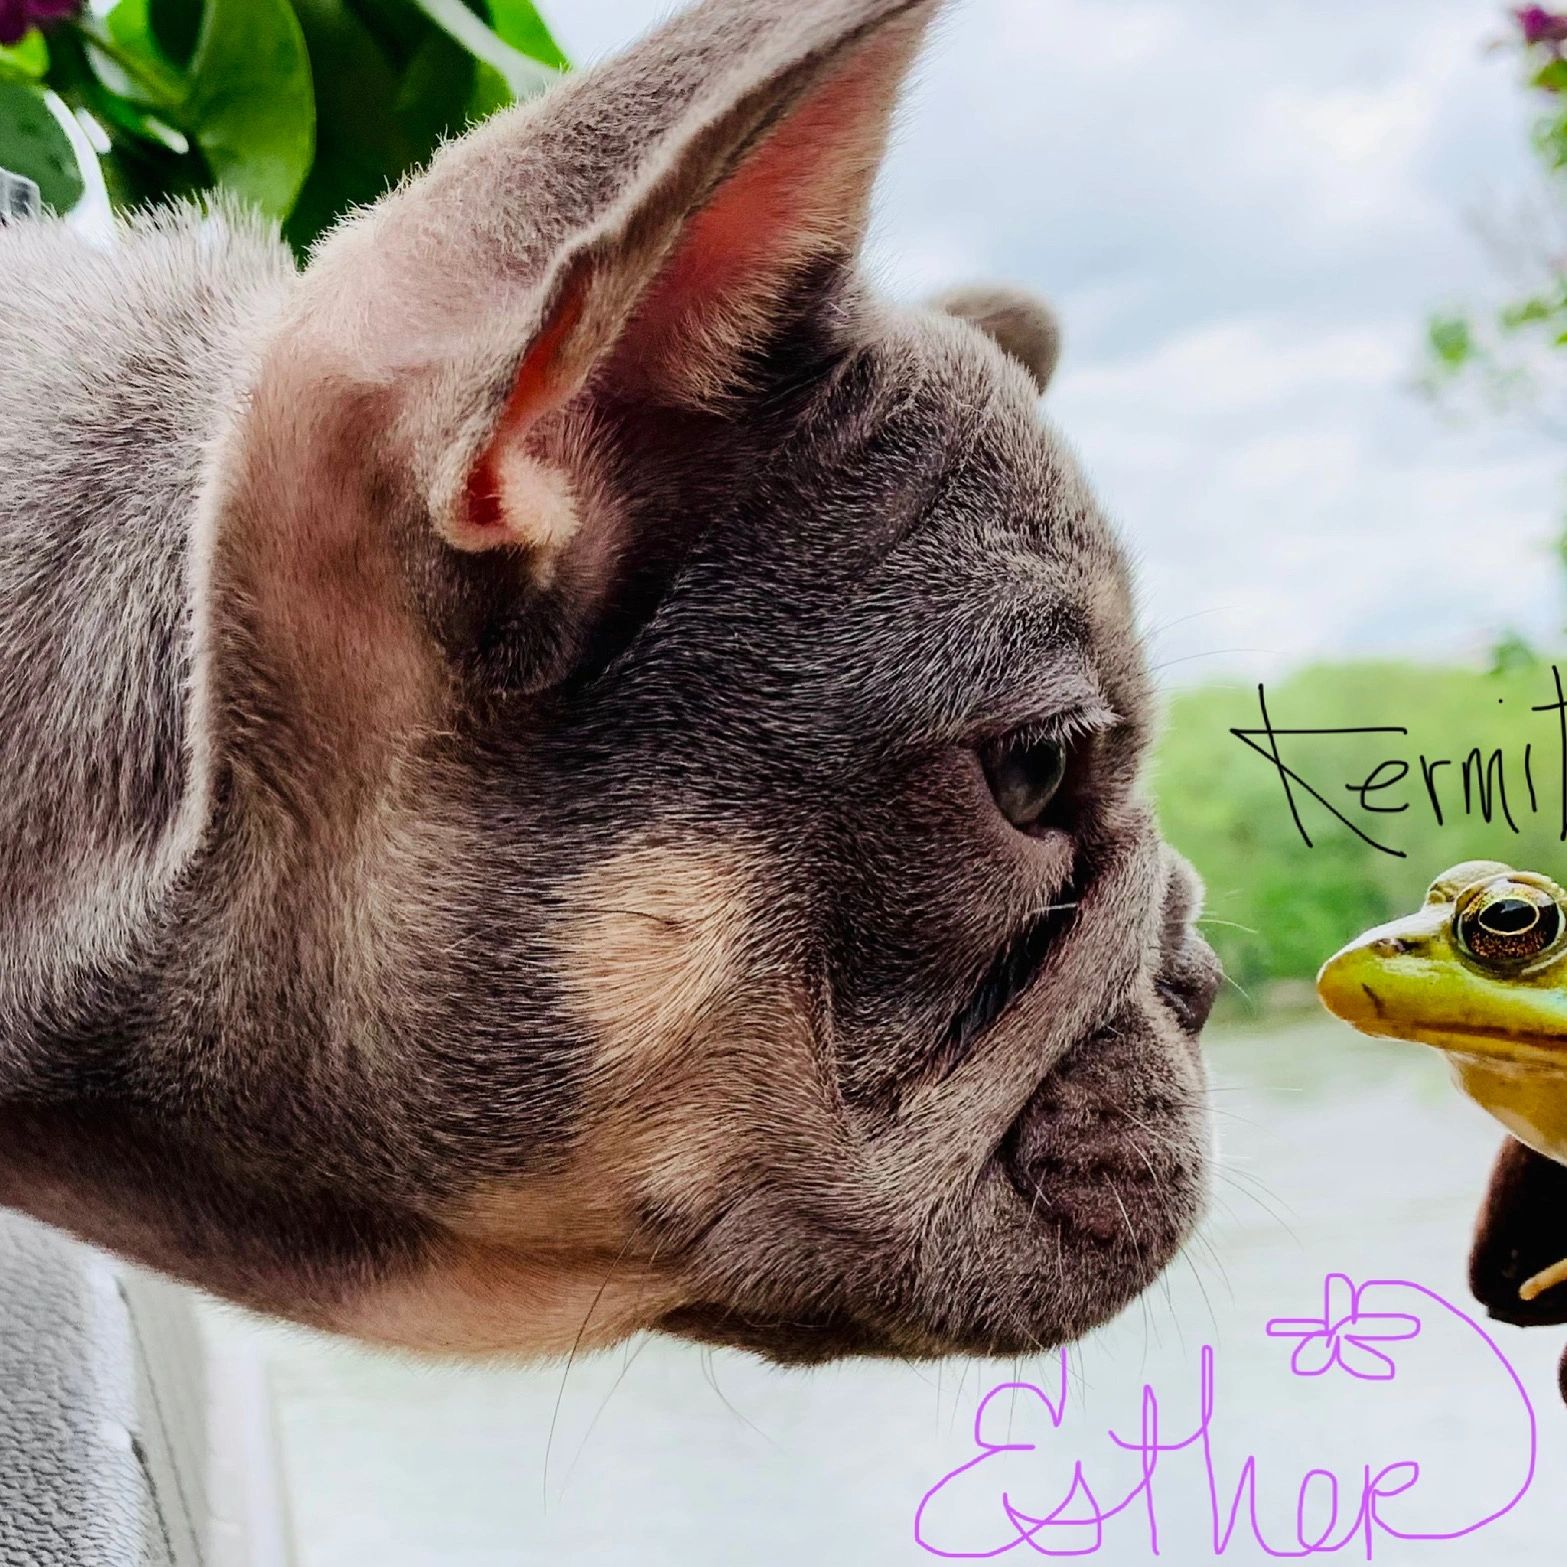 Frenchie and froggie